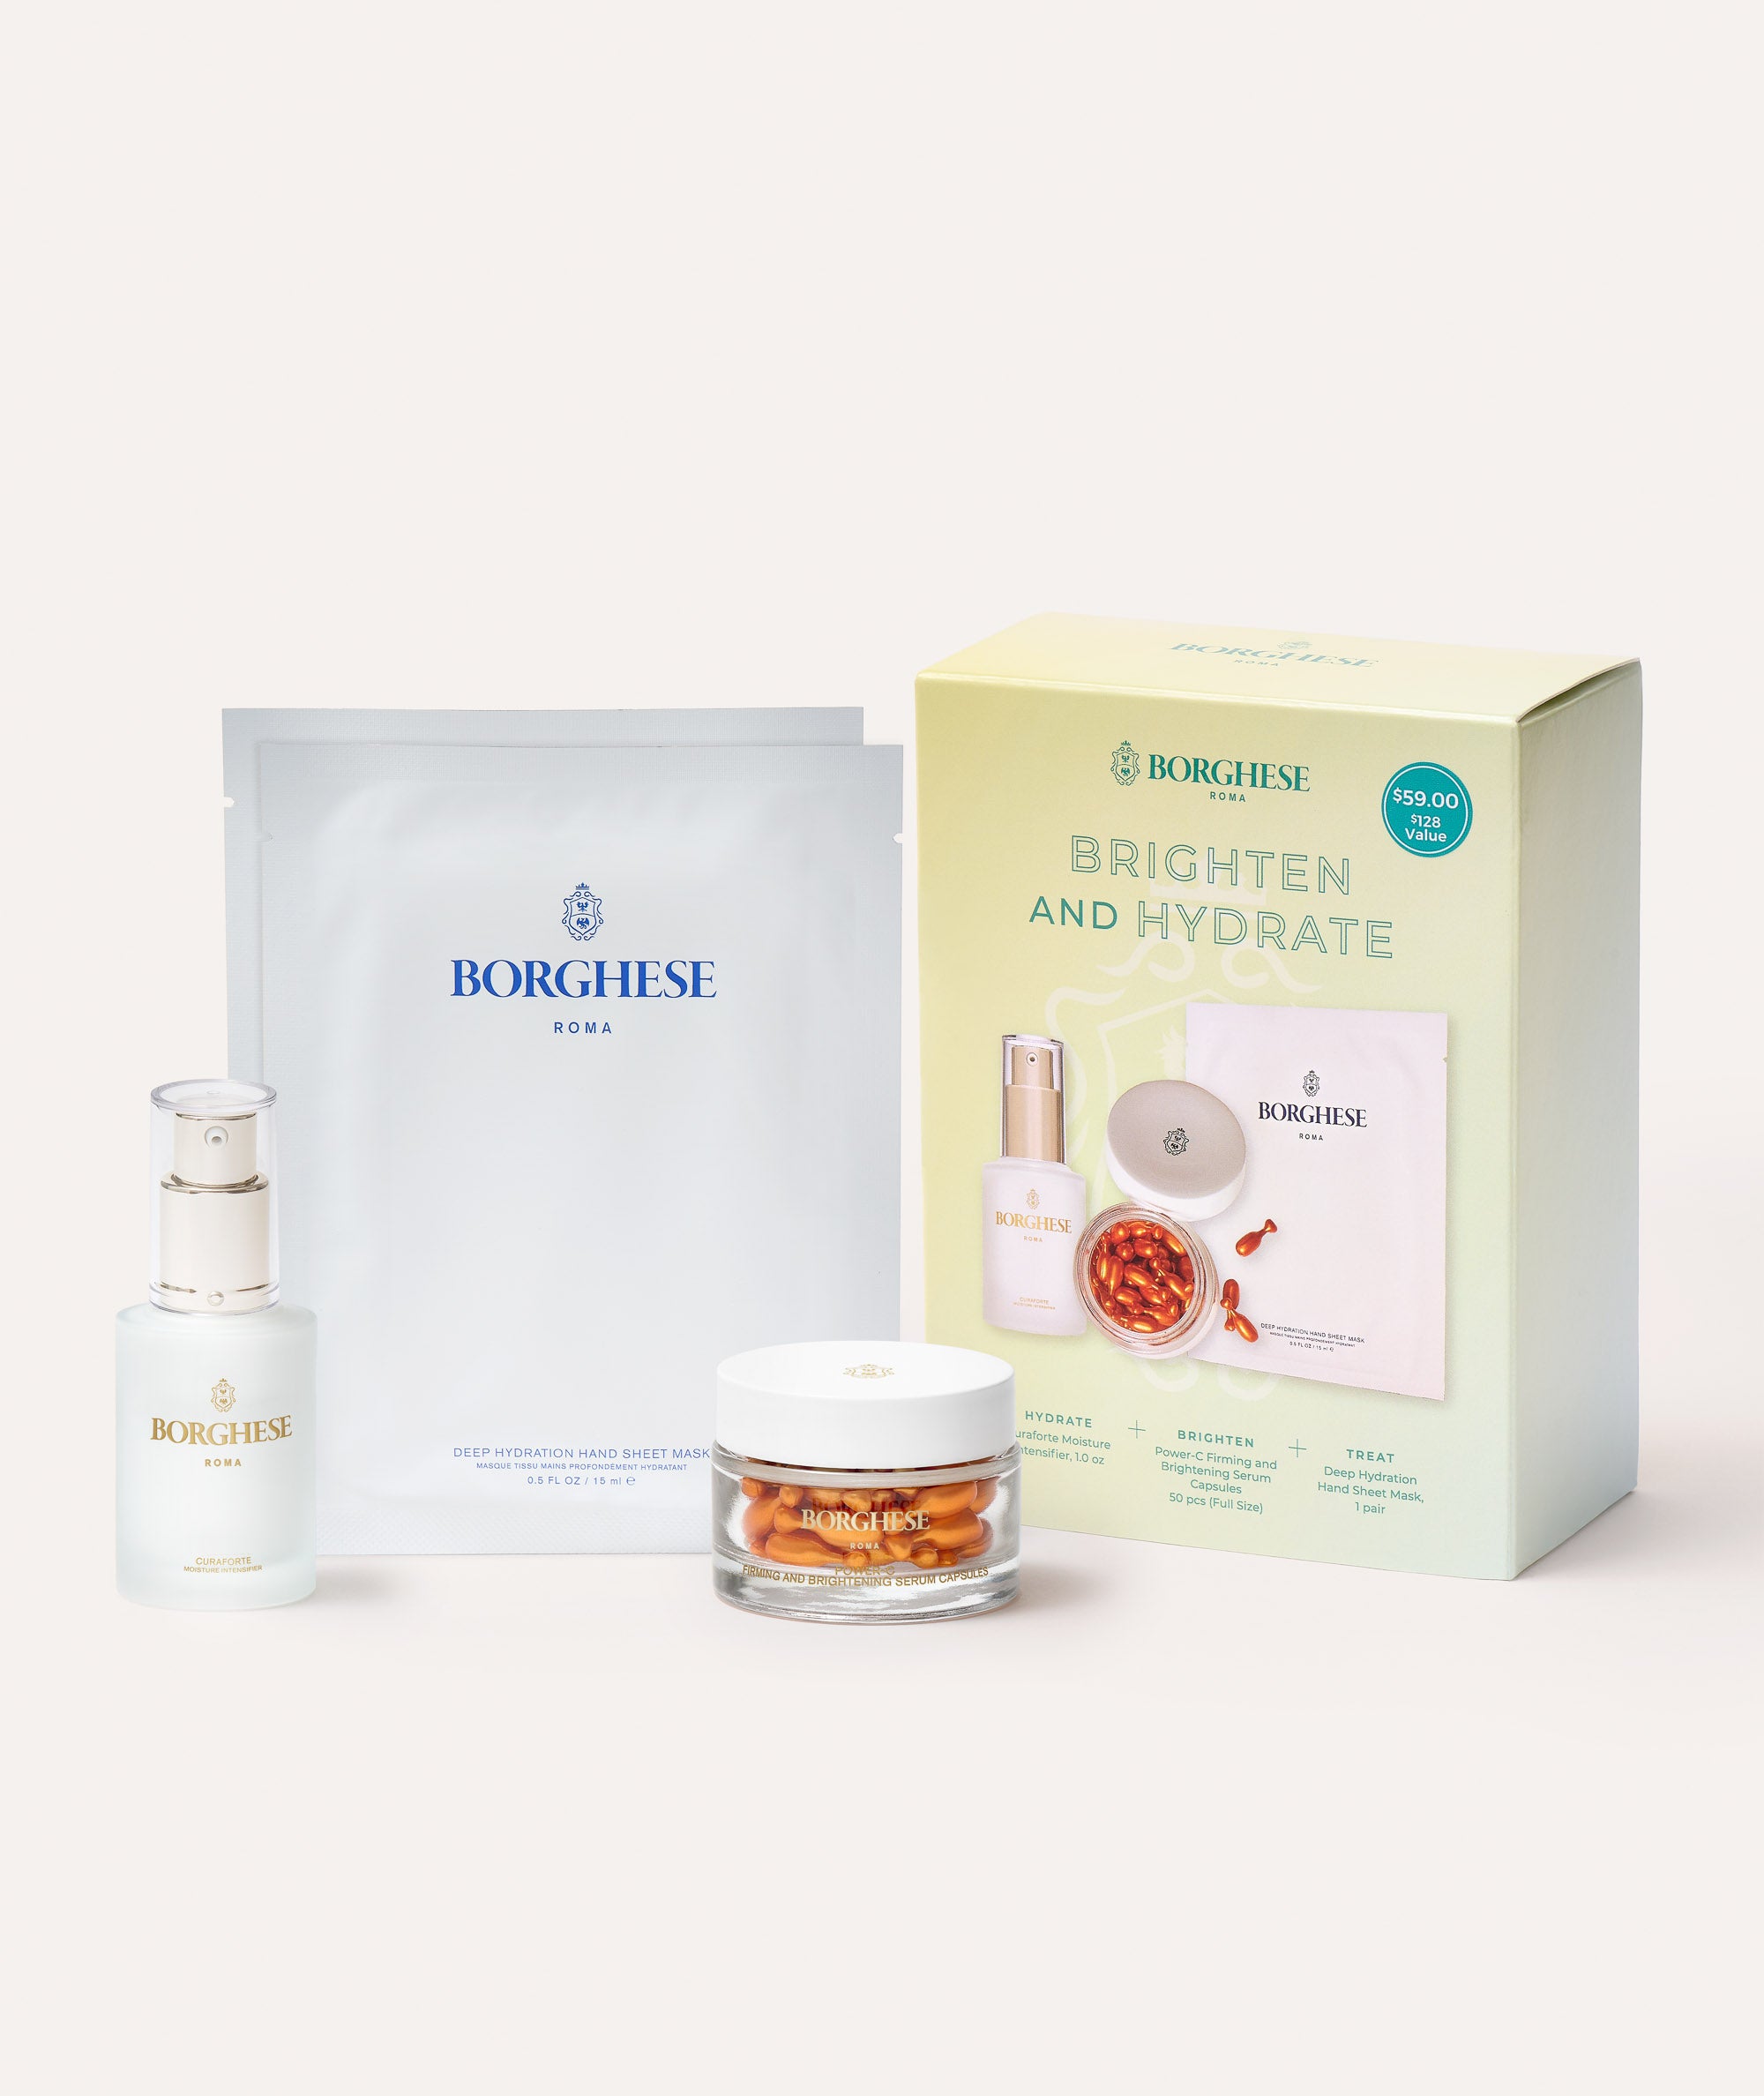 This is a picture of the set contents and gift box of the Borghese Brighten & Hydrate Gift Set